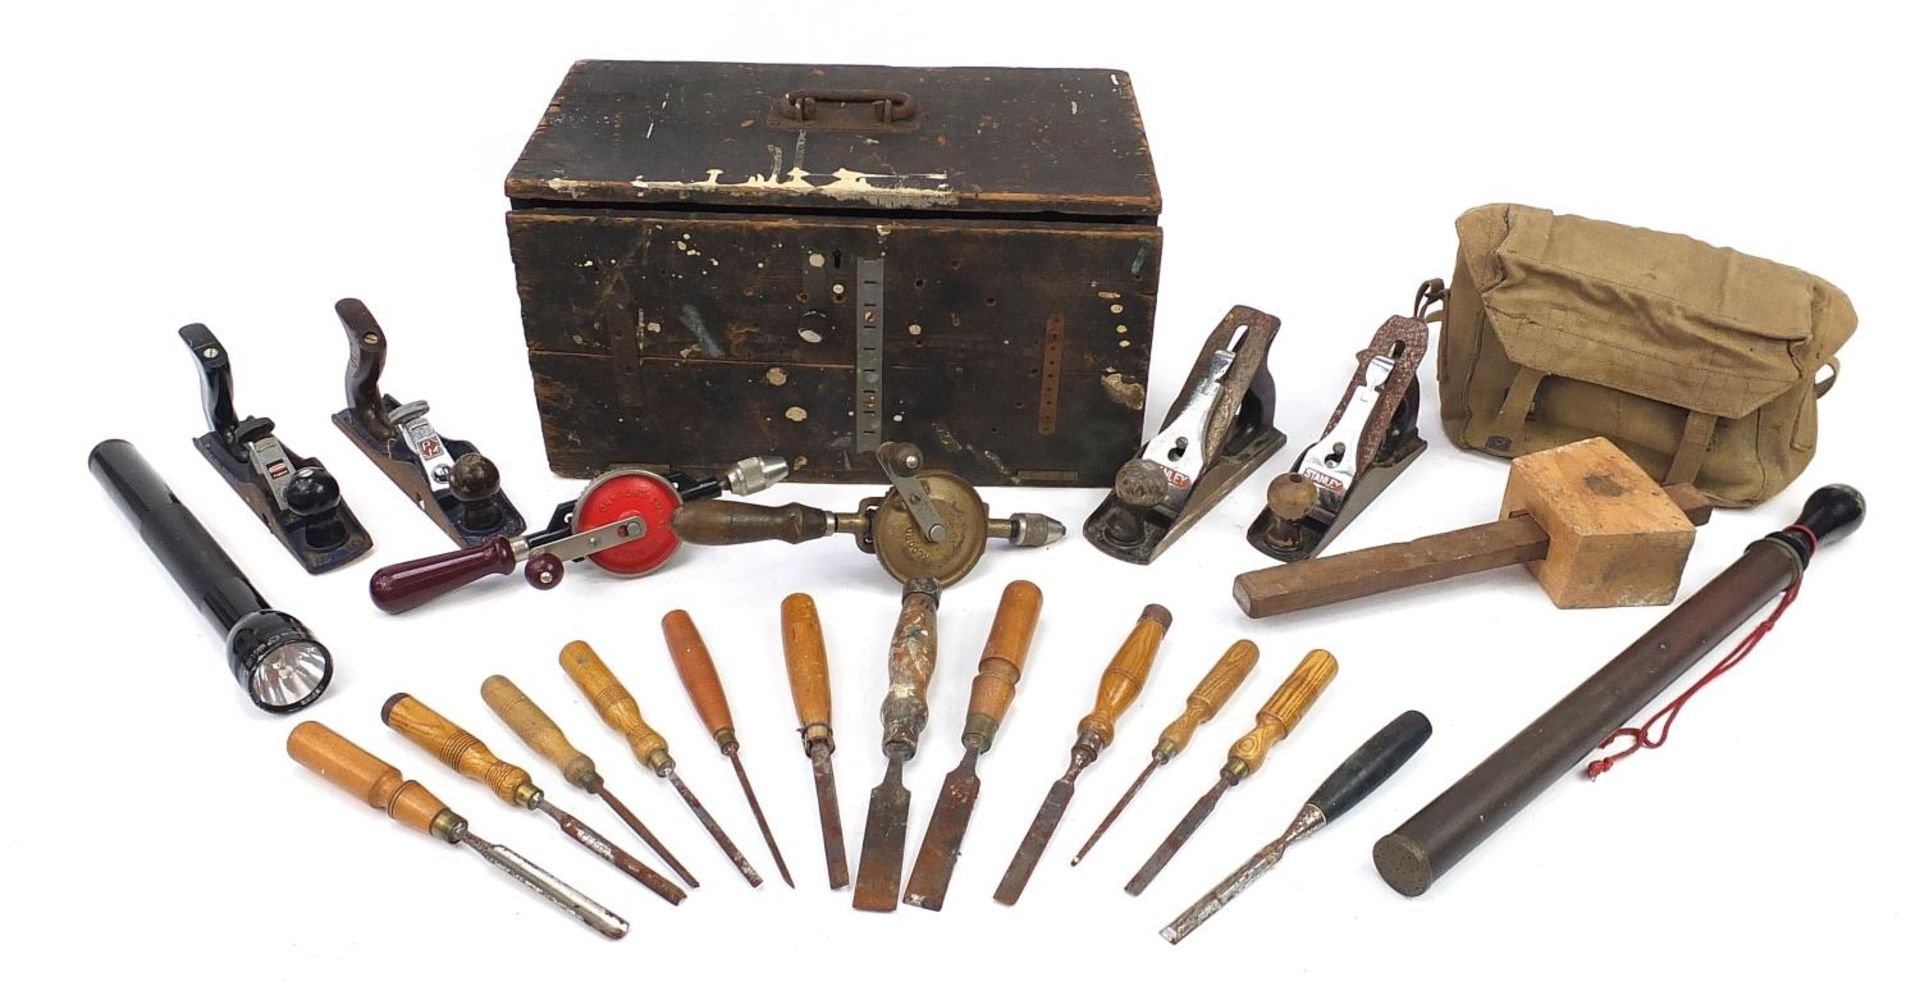 Vintage tools housed in a pine chest including chisels, wood planes and hand drills, the chest